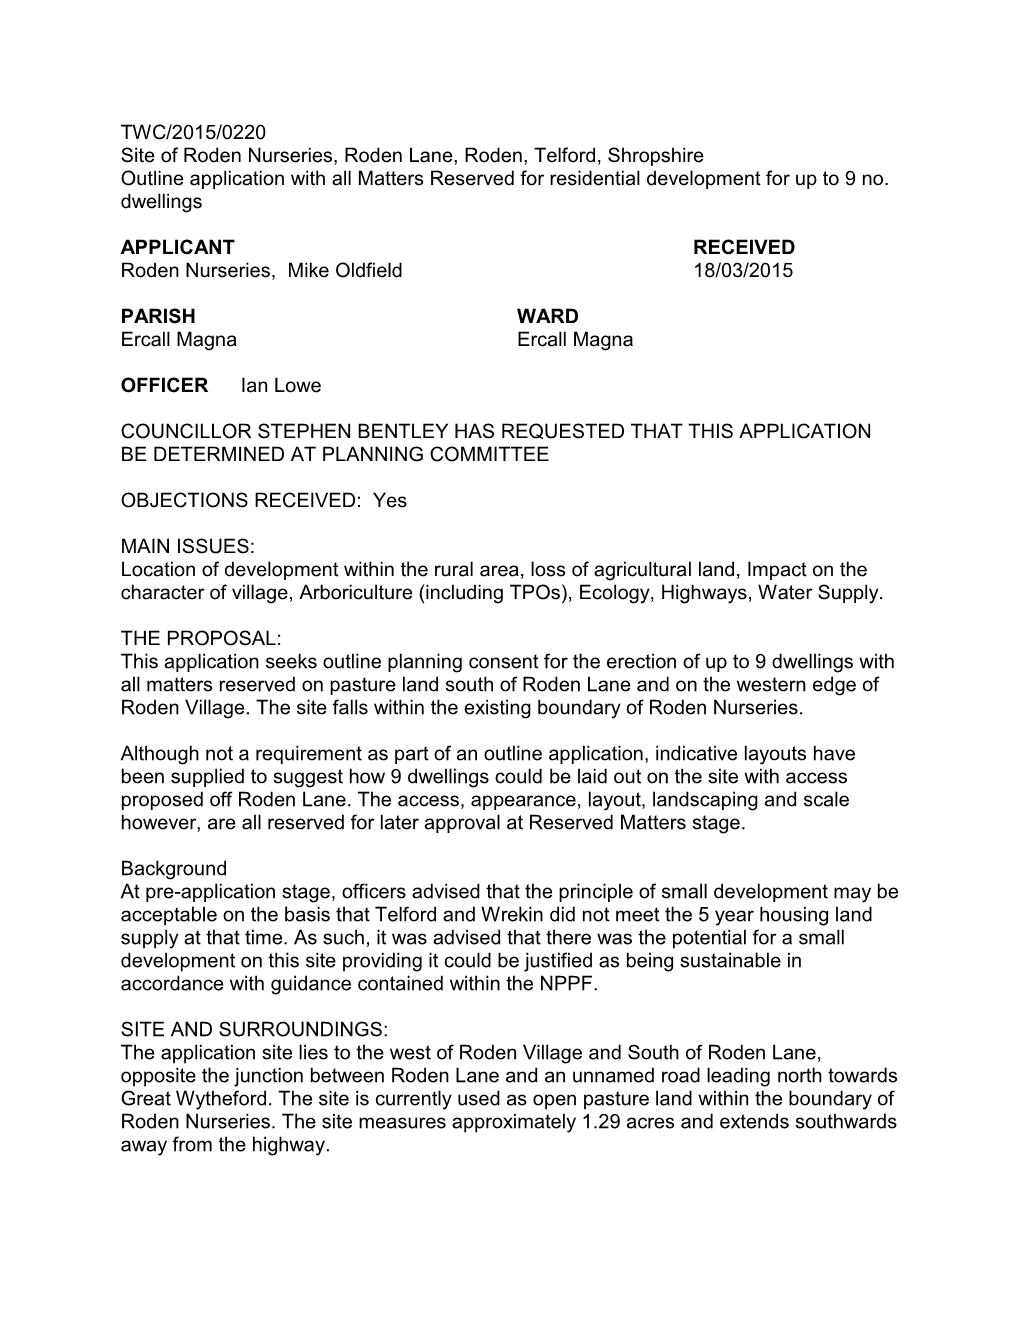 TWC/2015/0220 Site of Roden Nurseries, Roden Lane, Roden, Telford, Shropshire Outline Application with All Matters Reserved for Residential Development for up to 9 No